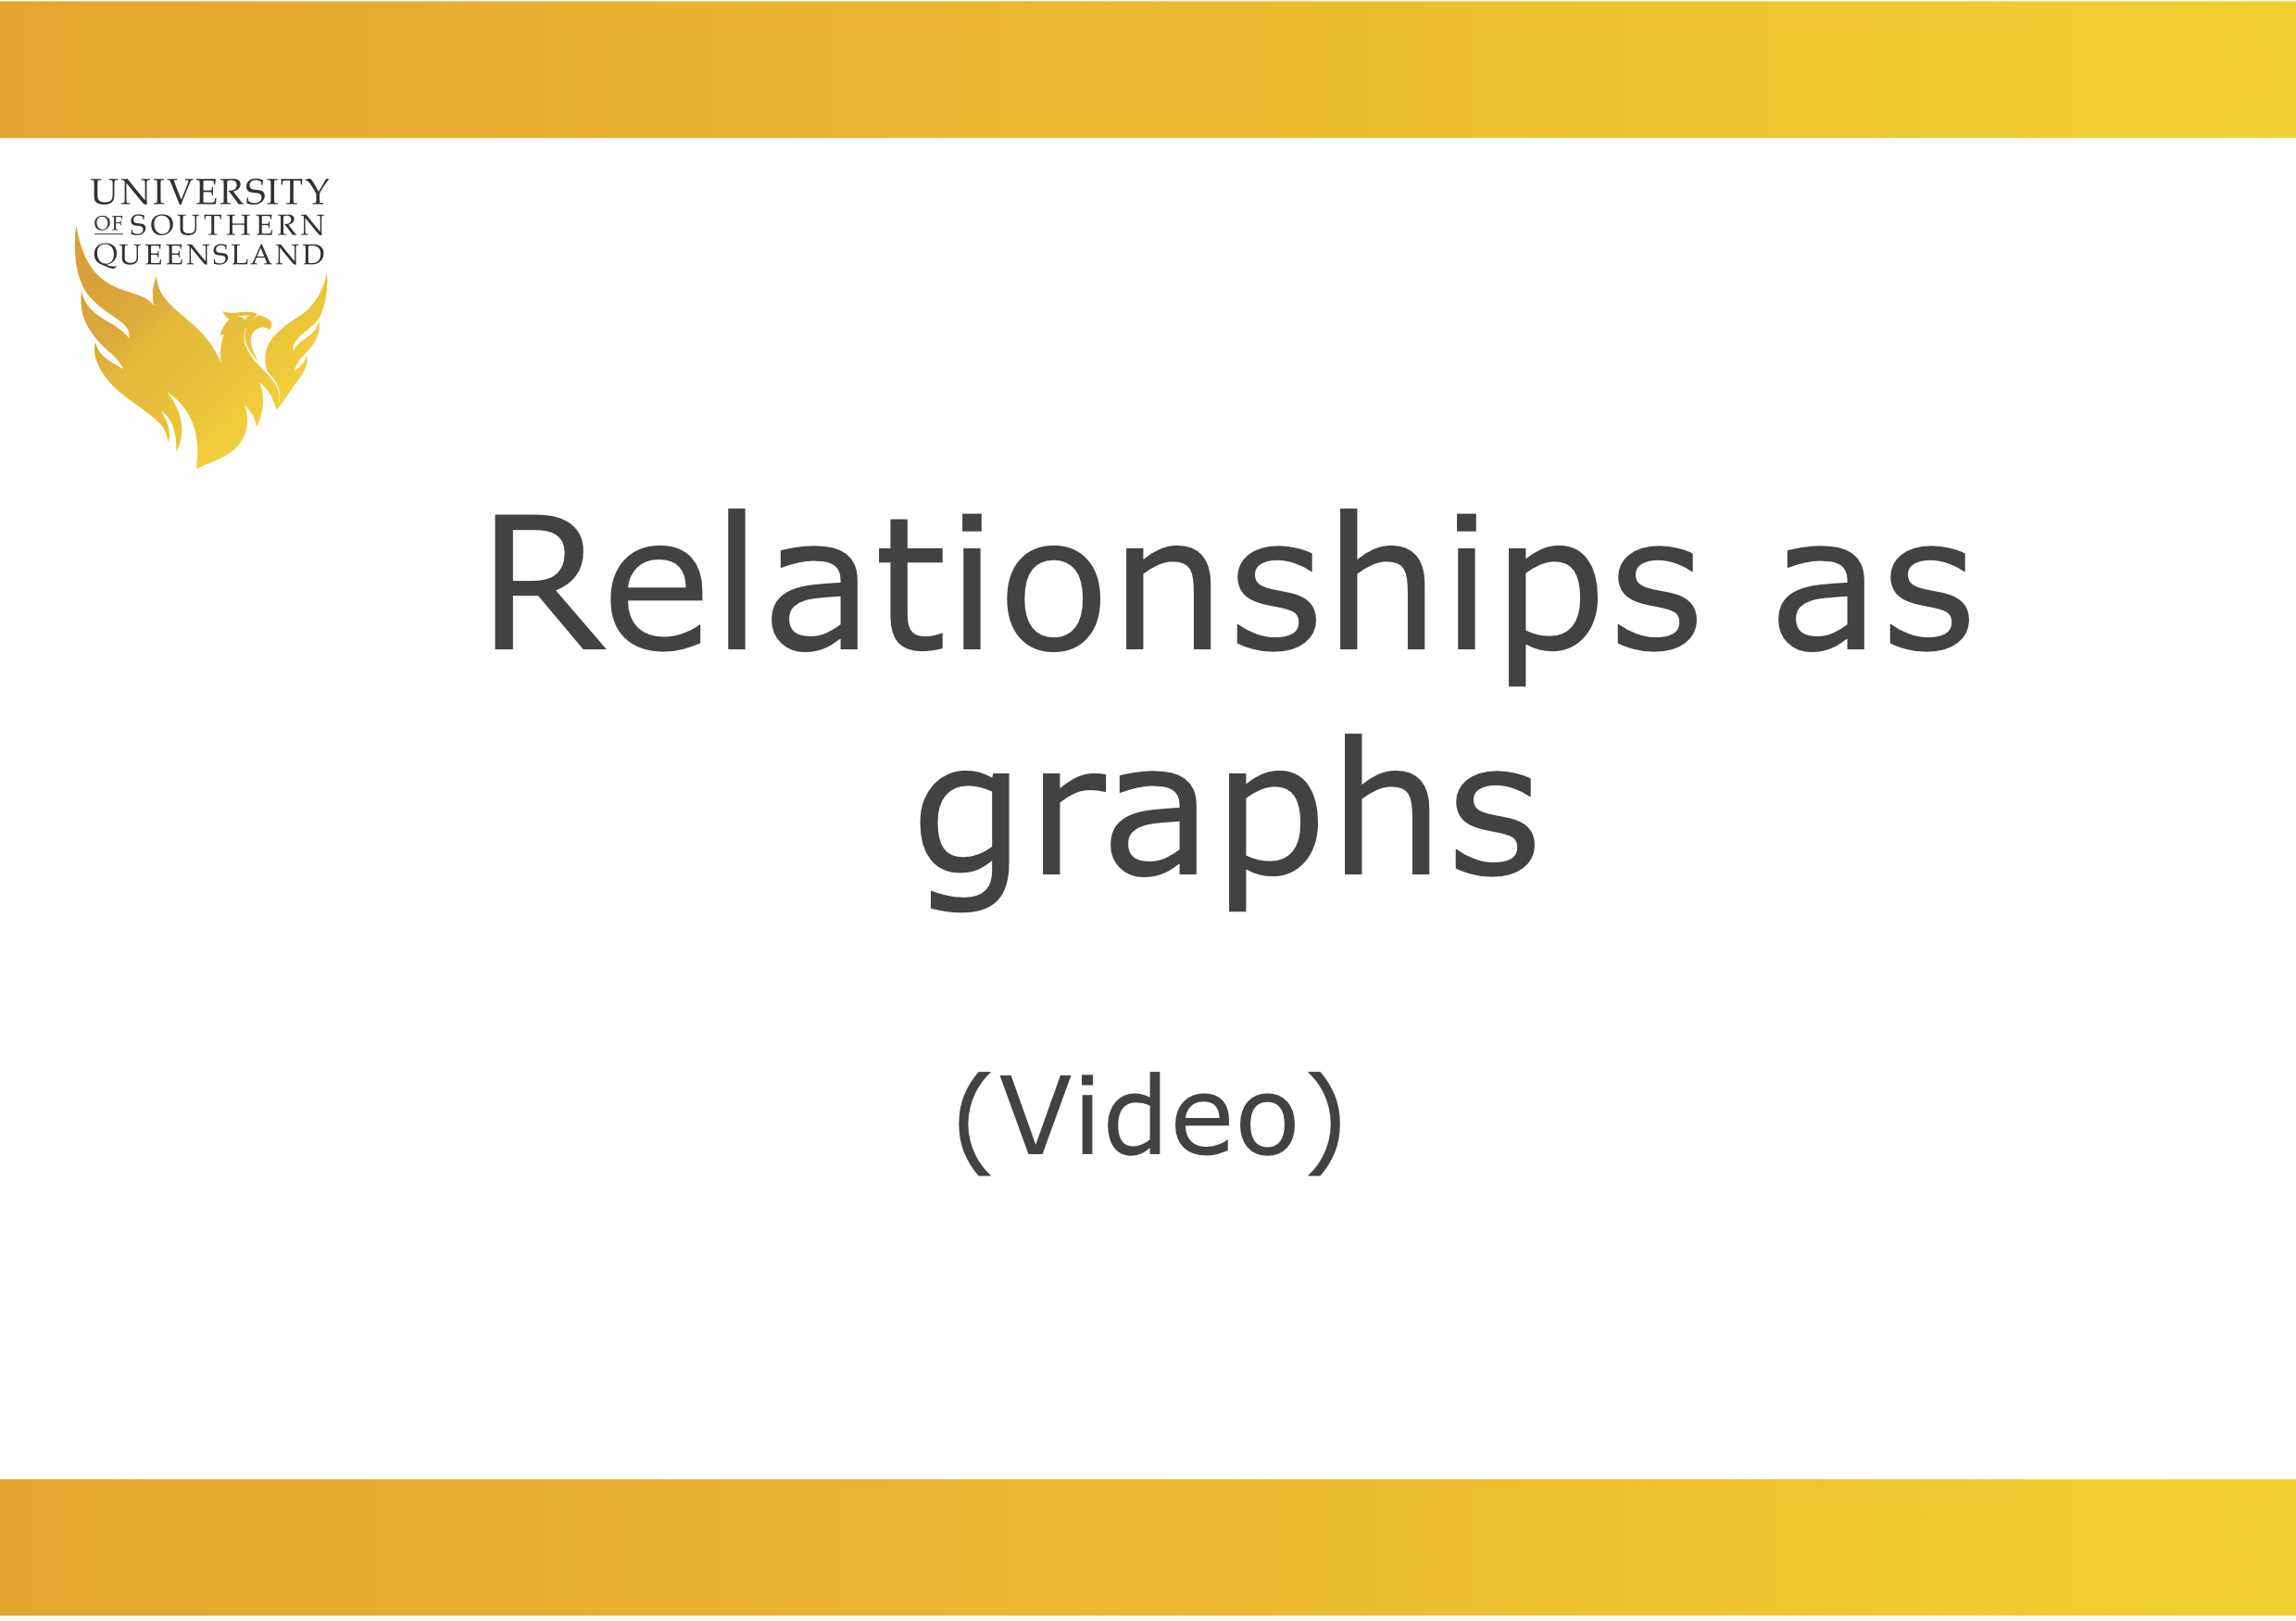 Video to play the video for Relationships as graphs